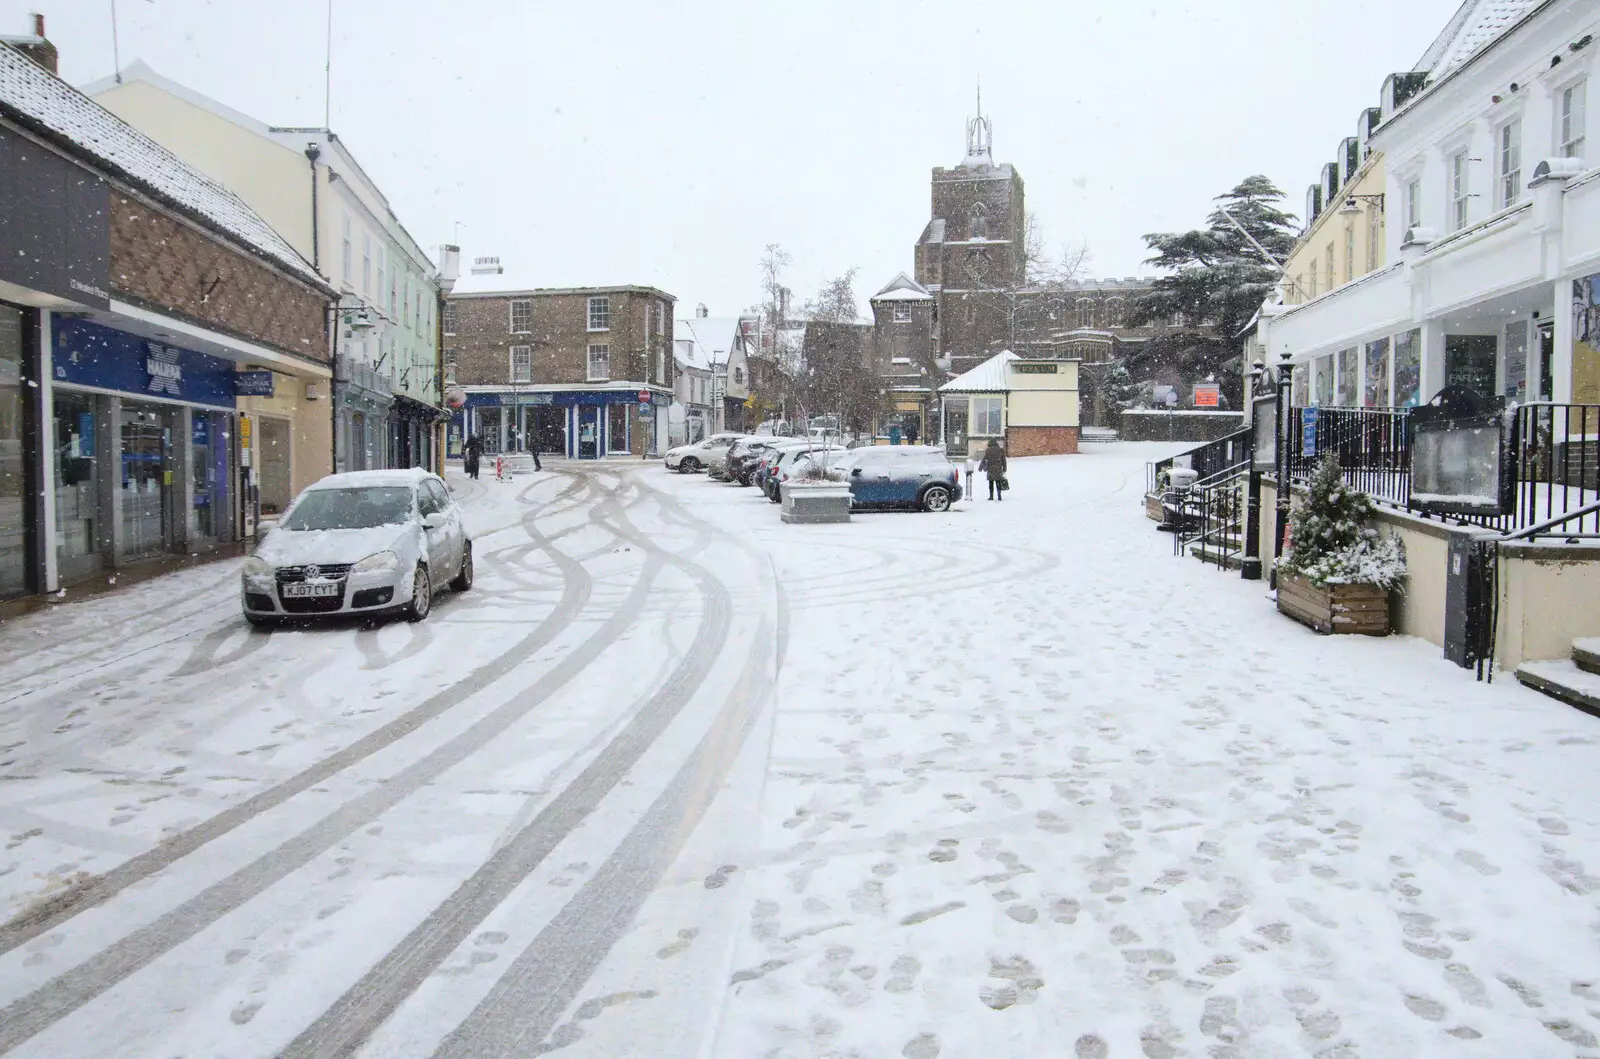 Footprints on the market place, from A Snowy Morning, Diss, Norfolk - 16th January 2021